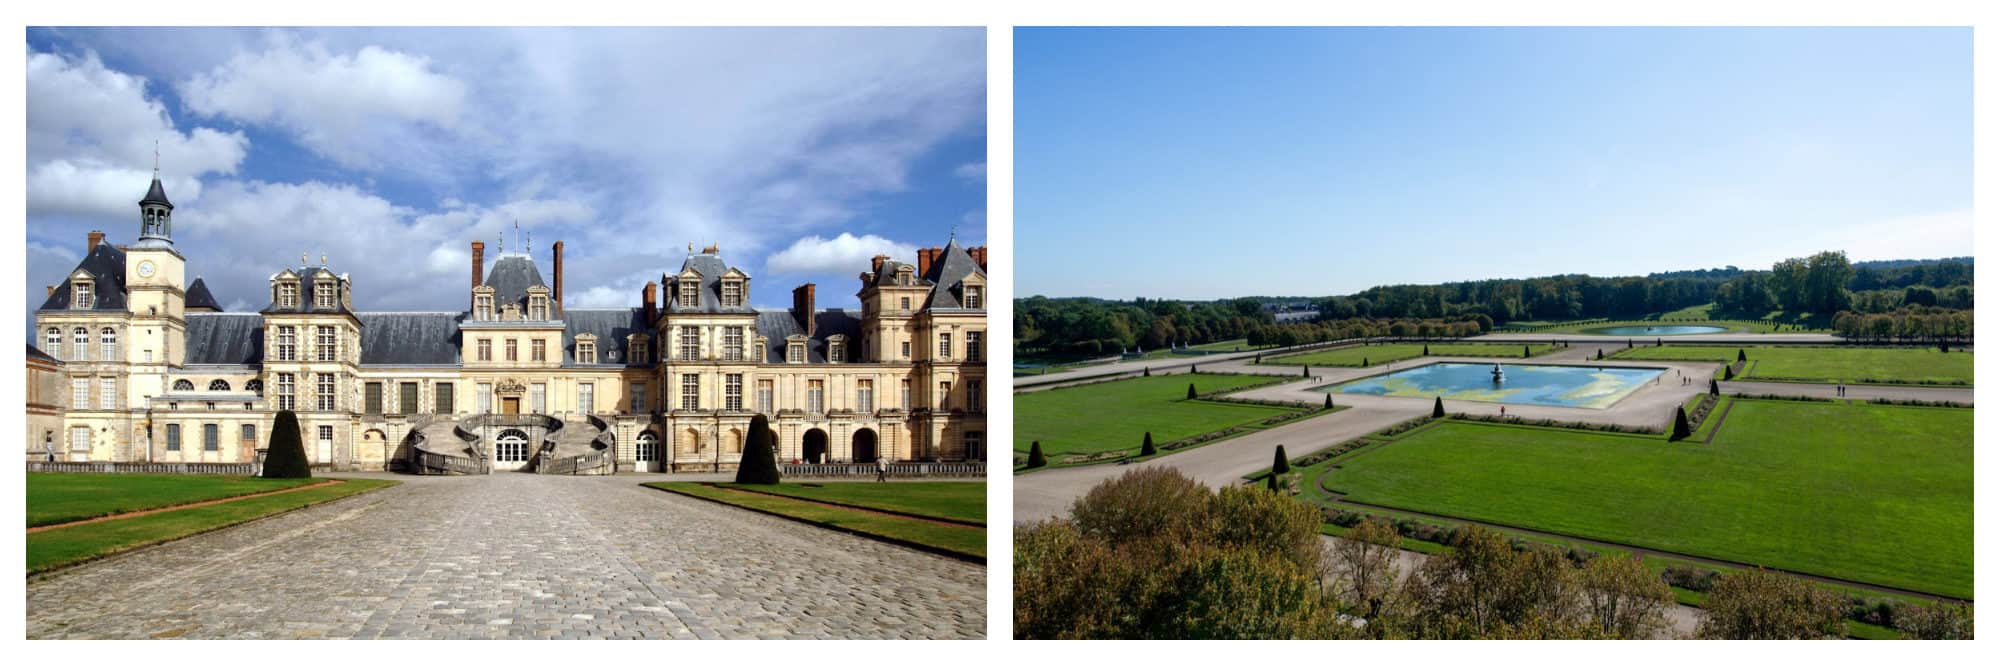 The Chateau de Fontainbleau with its creamy stone and grey roof (left) and its park with numerous water features (right).